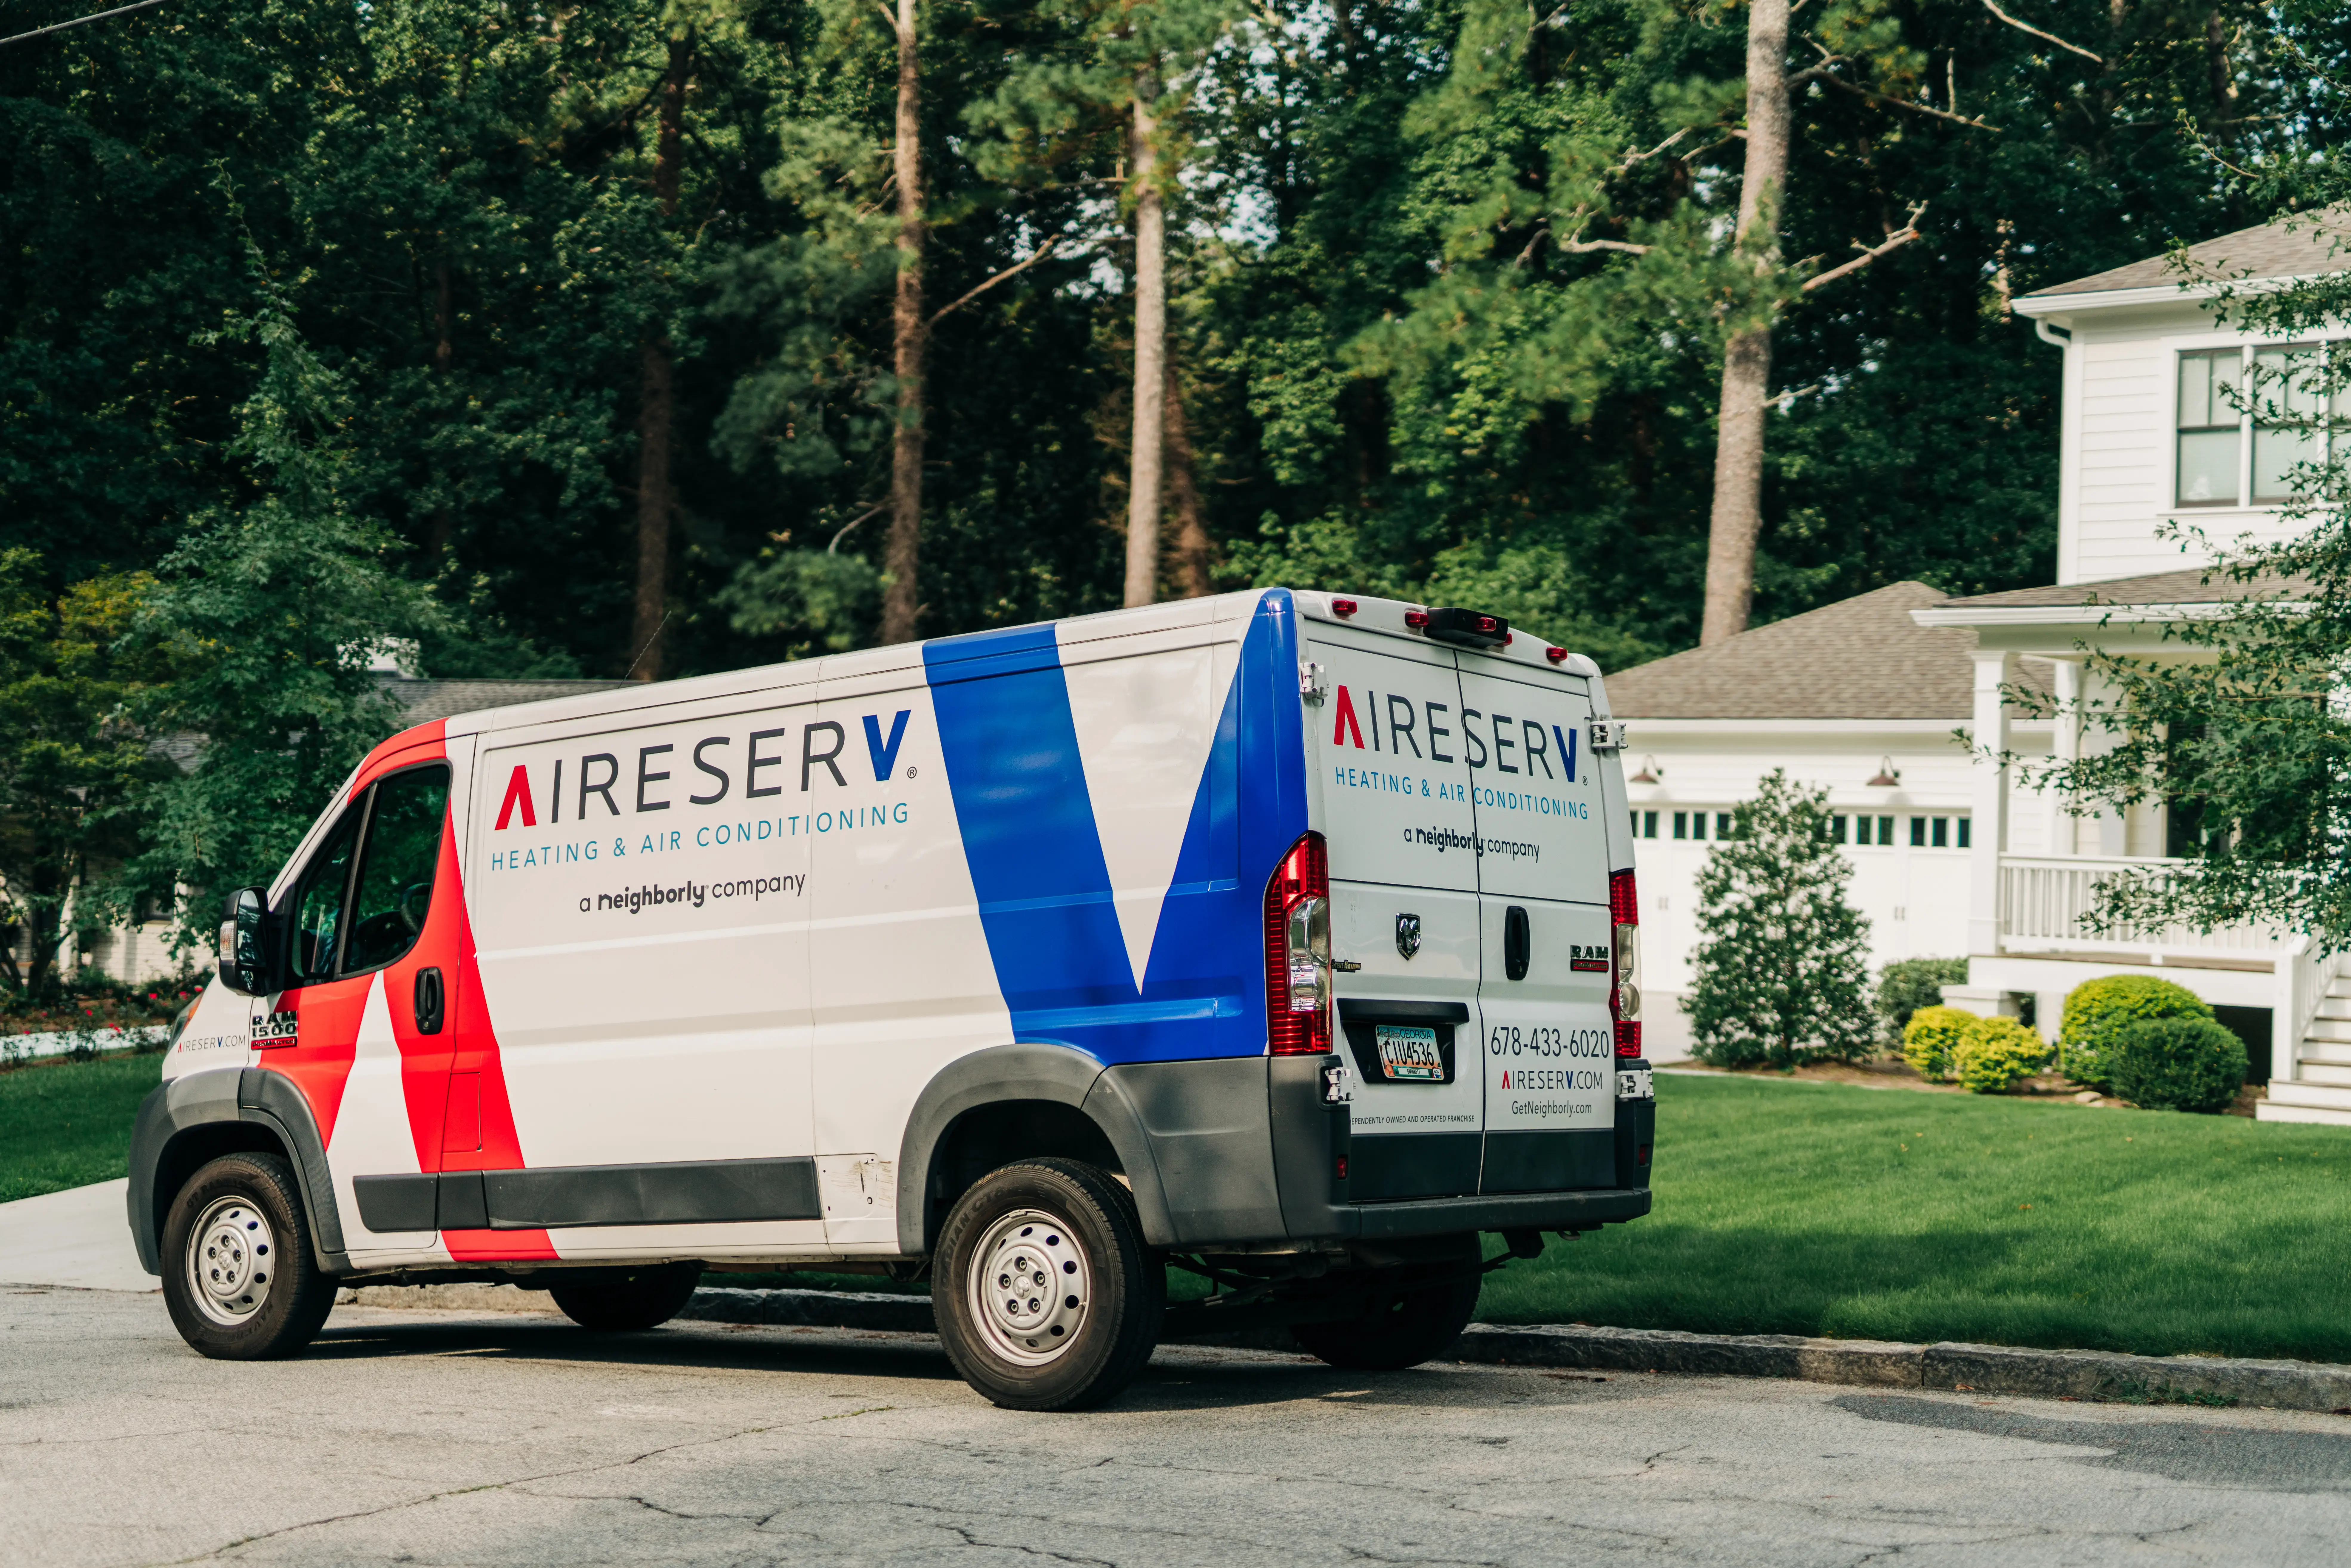 Aire Serv branded van parked in front of residential home.